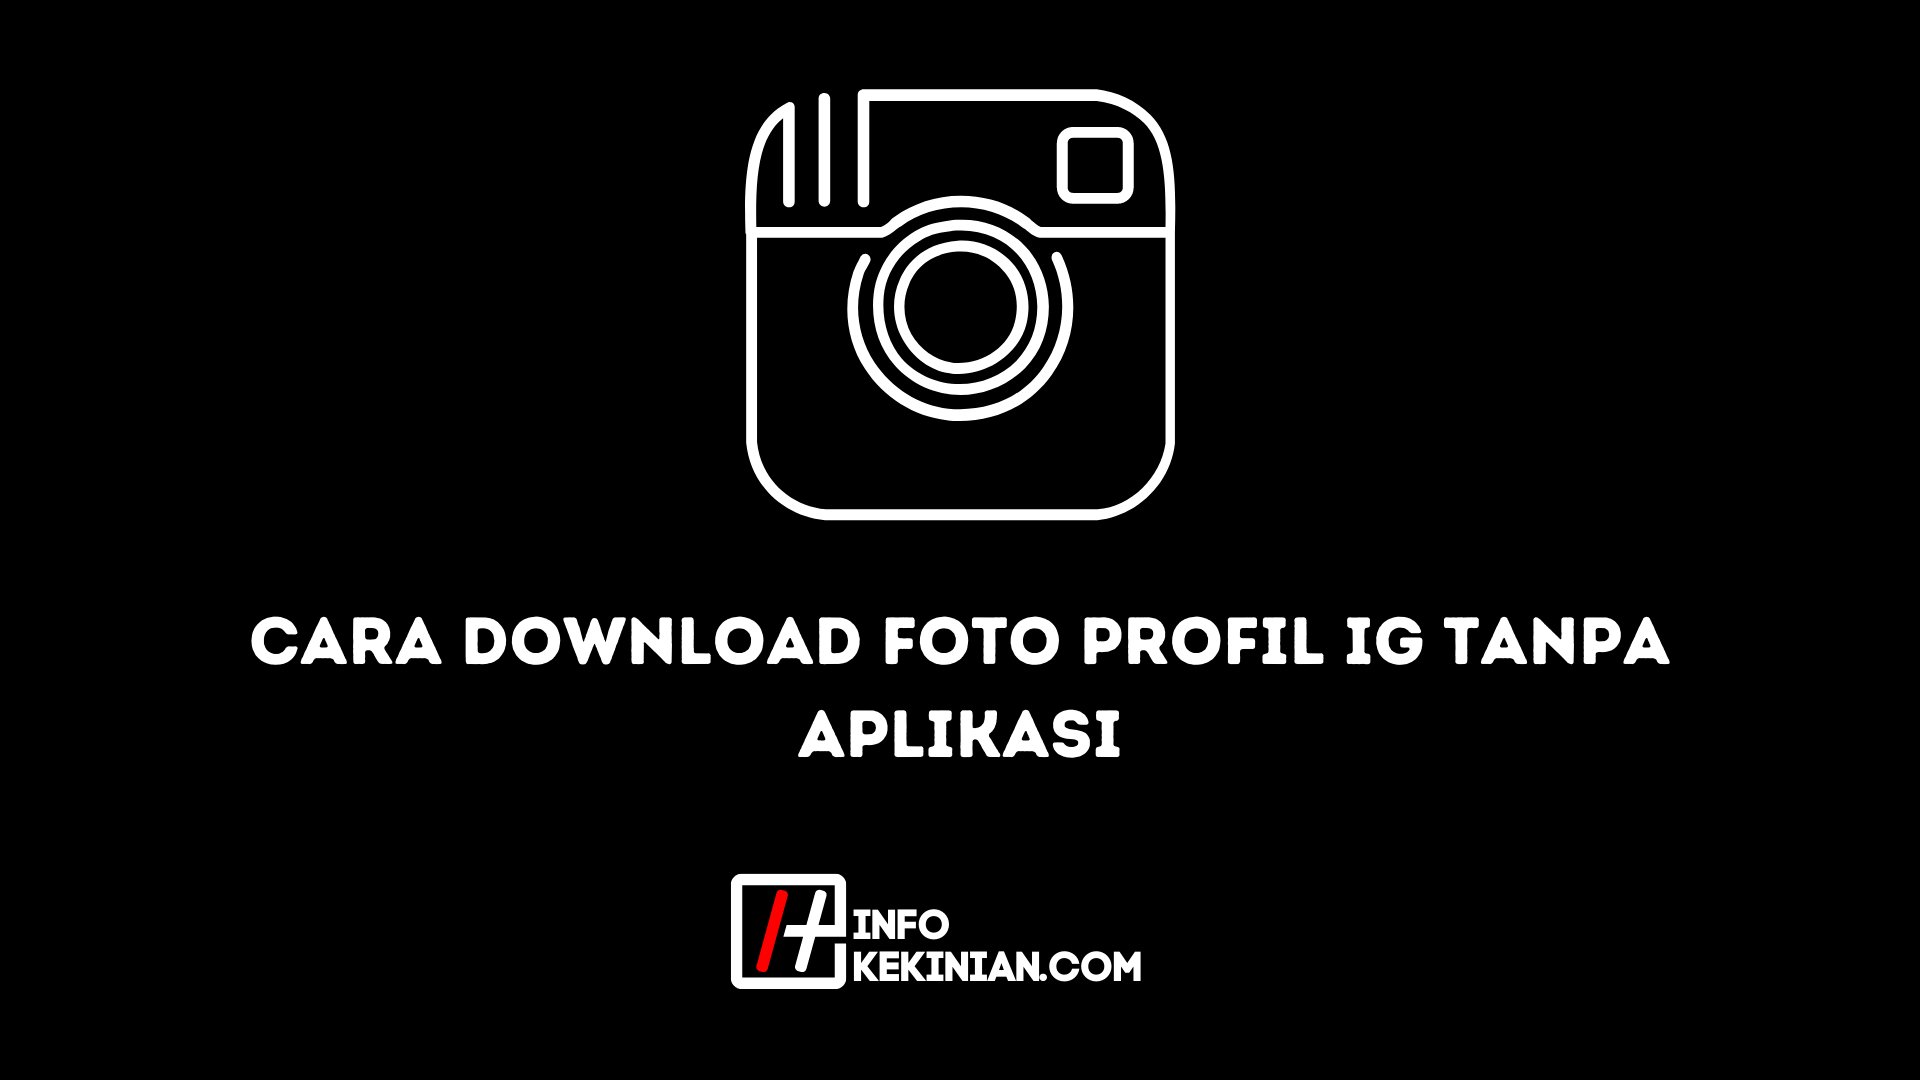 How to download an Ig profile photo without an application